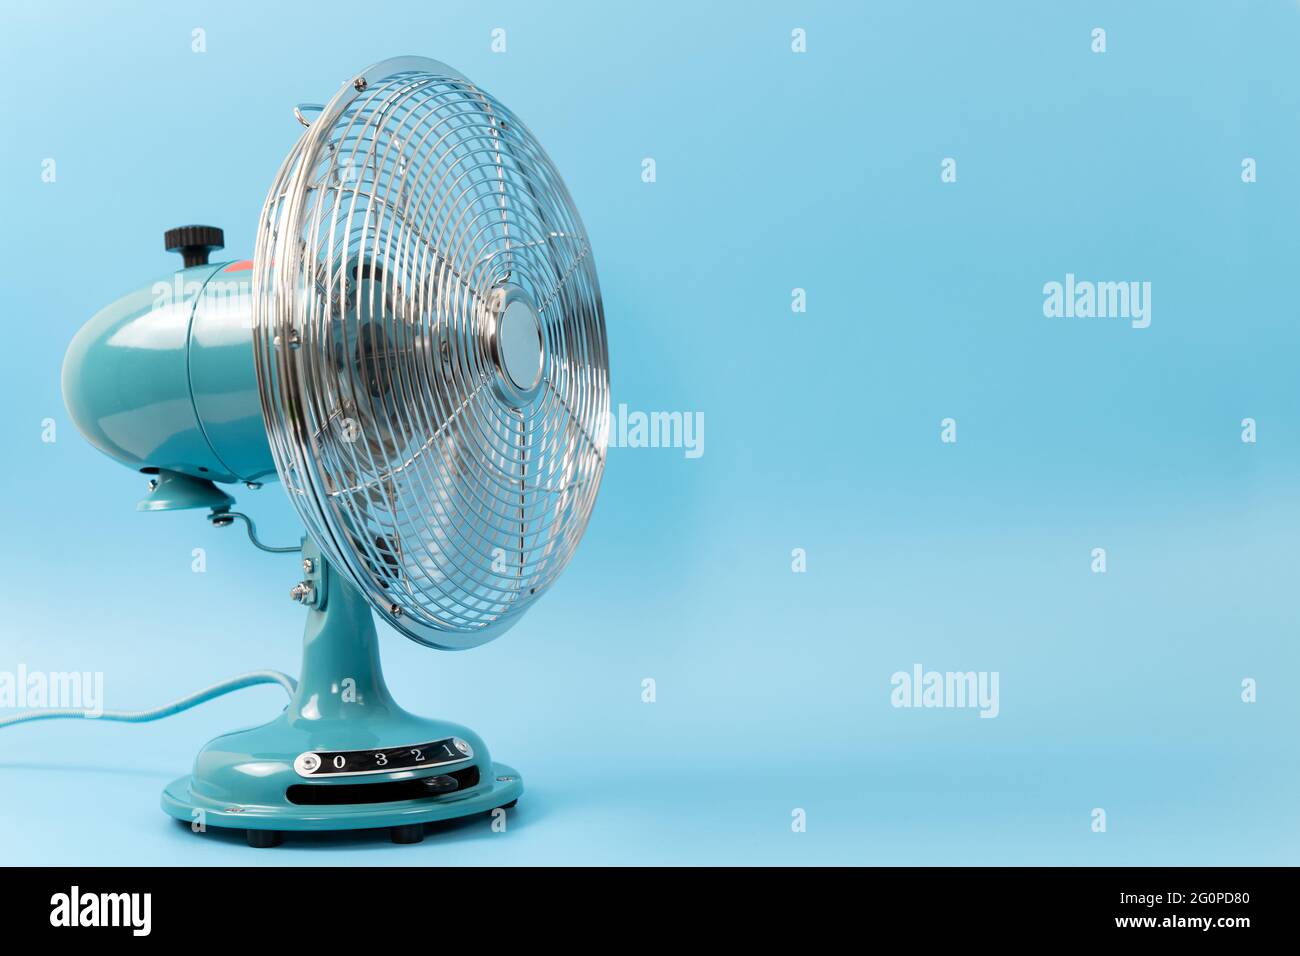 Vintage tabletop fan isolated on a blue background Stock Photo